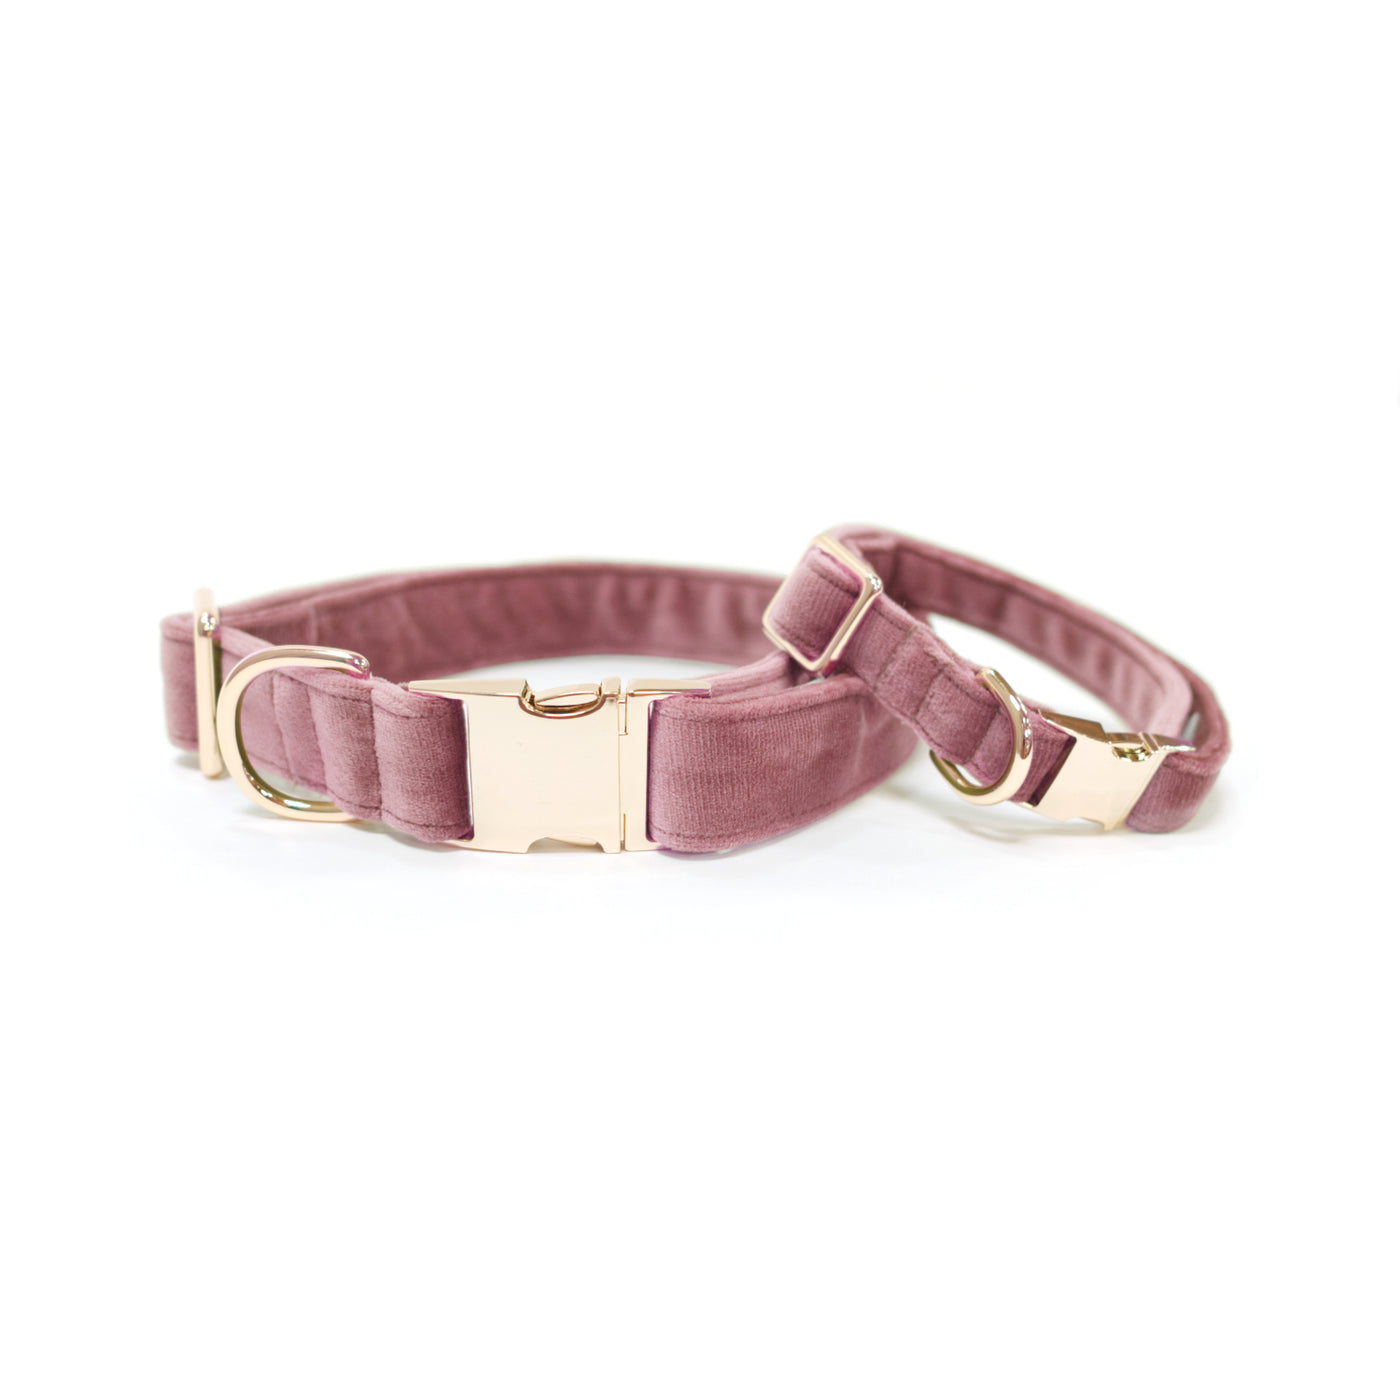 Millenial blush pink velvet dog collars with gold hardware in sizes medium and small